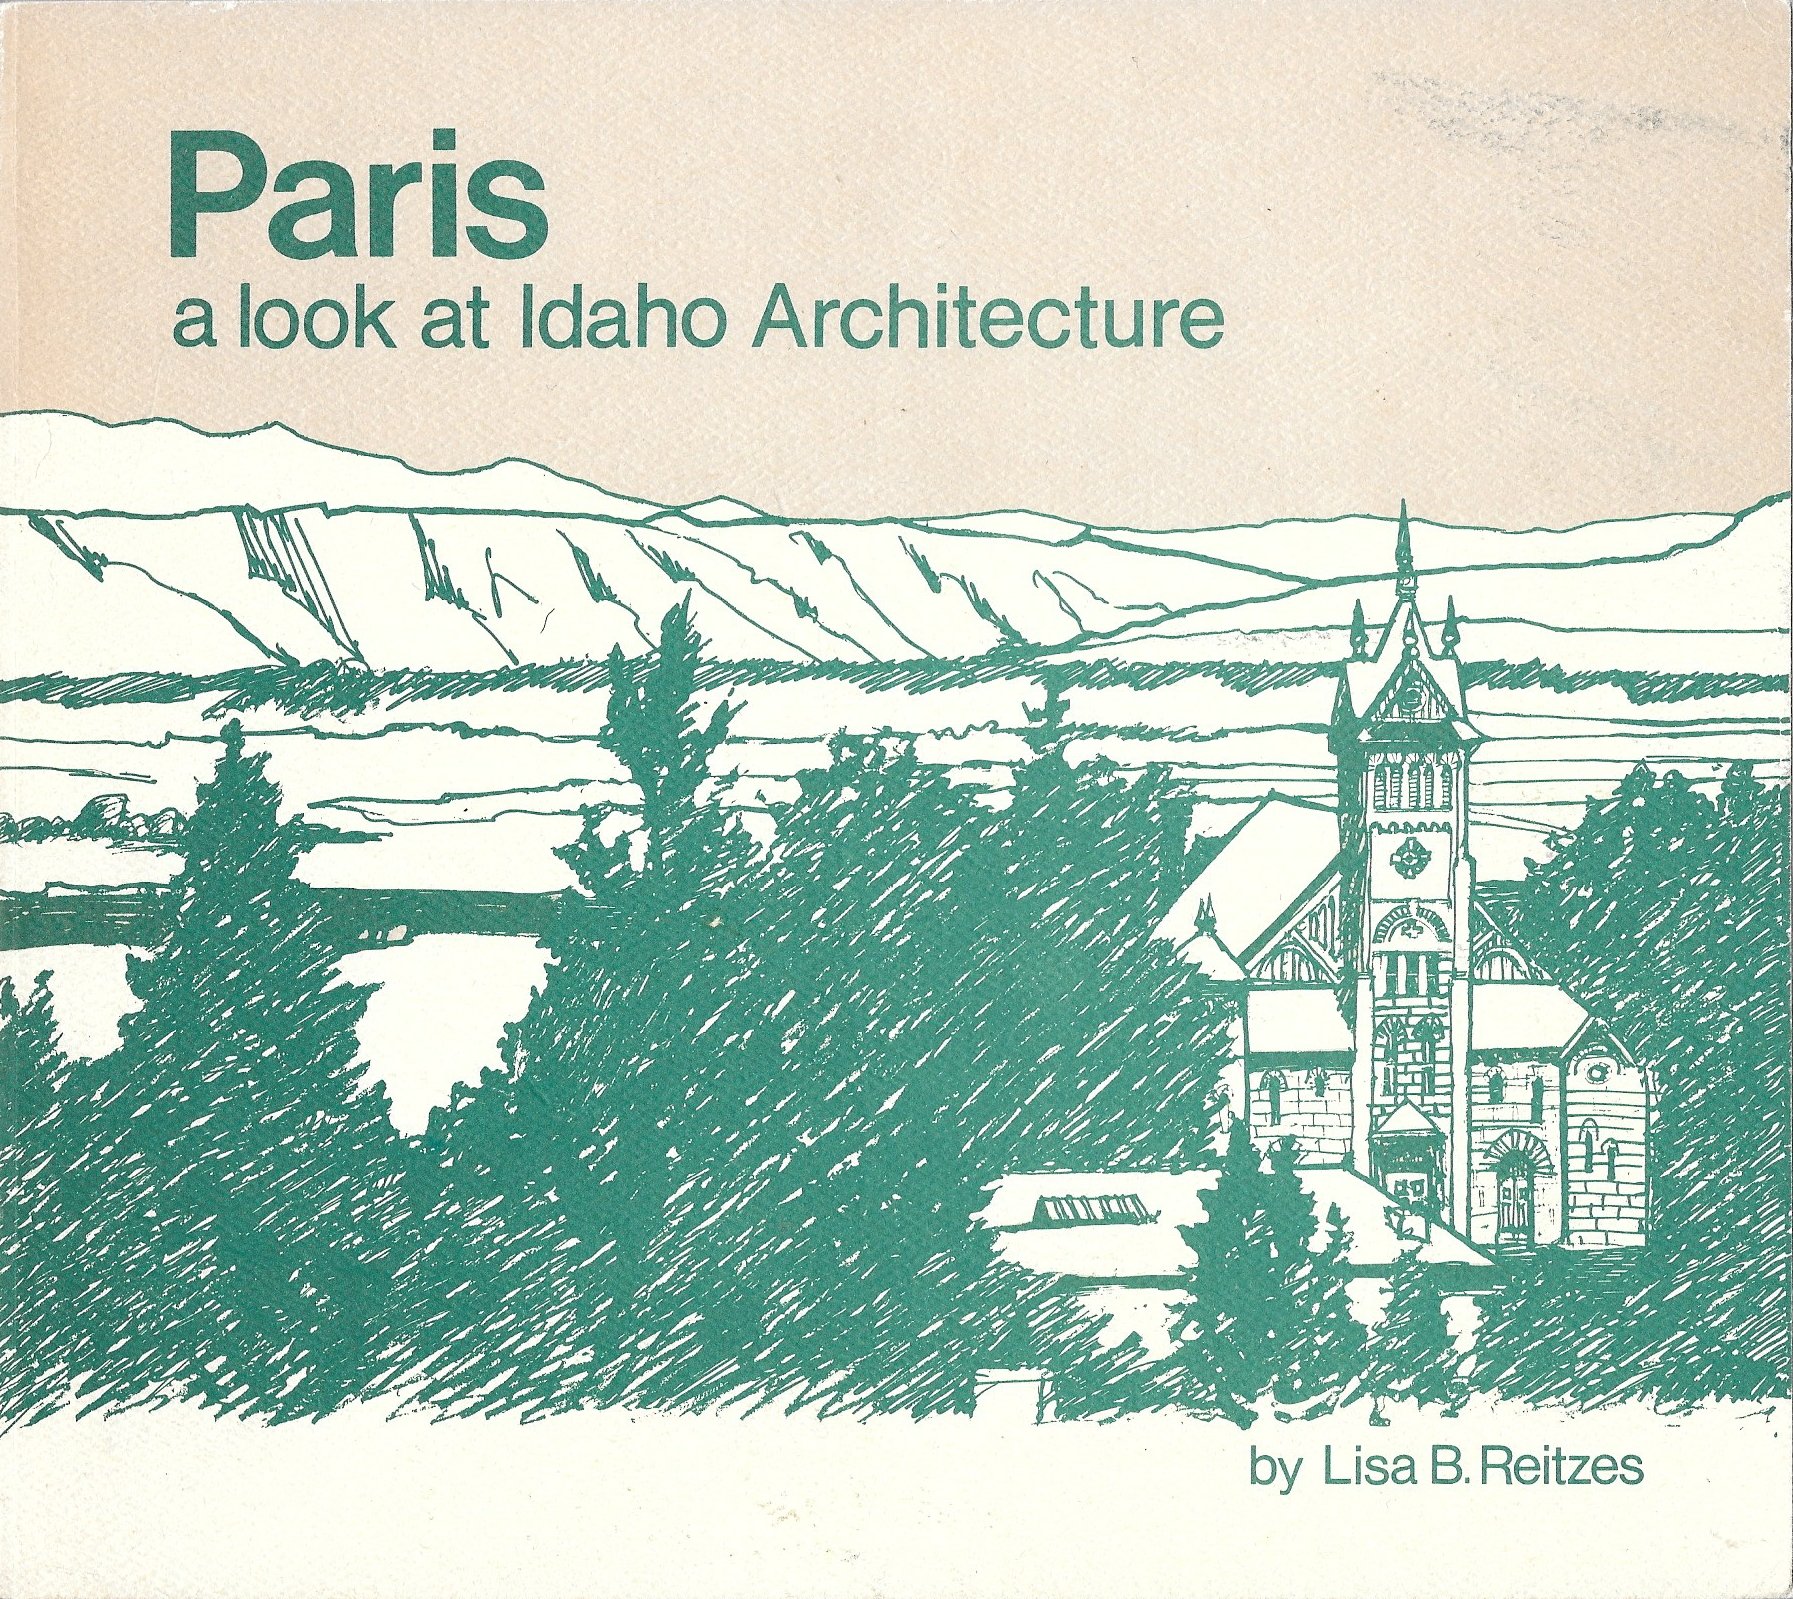 Paris: A look at Idaho architecture (book cover)